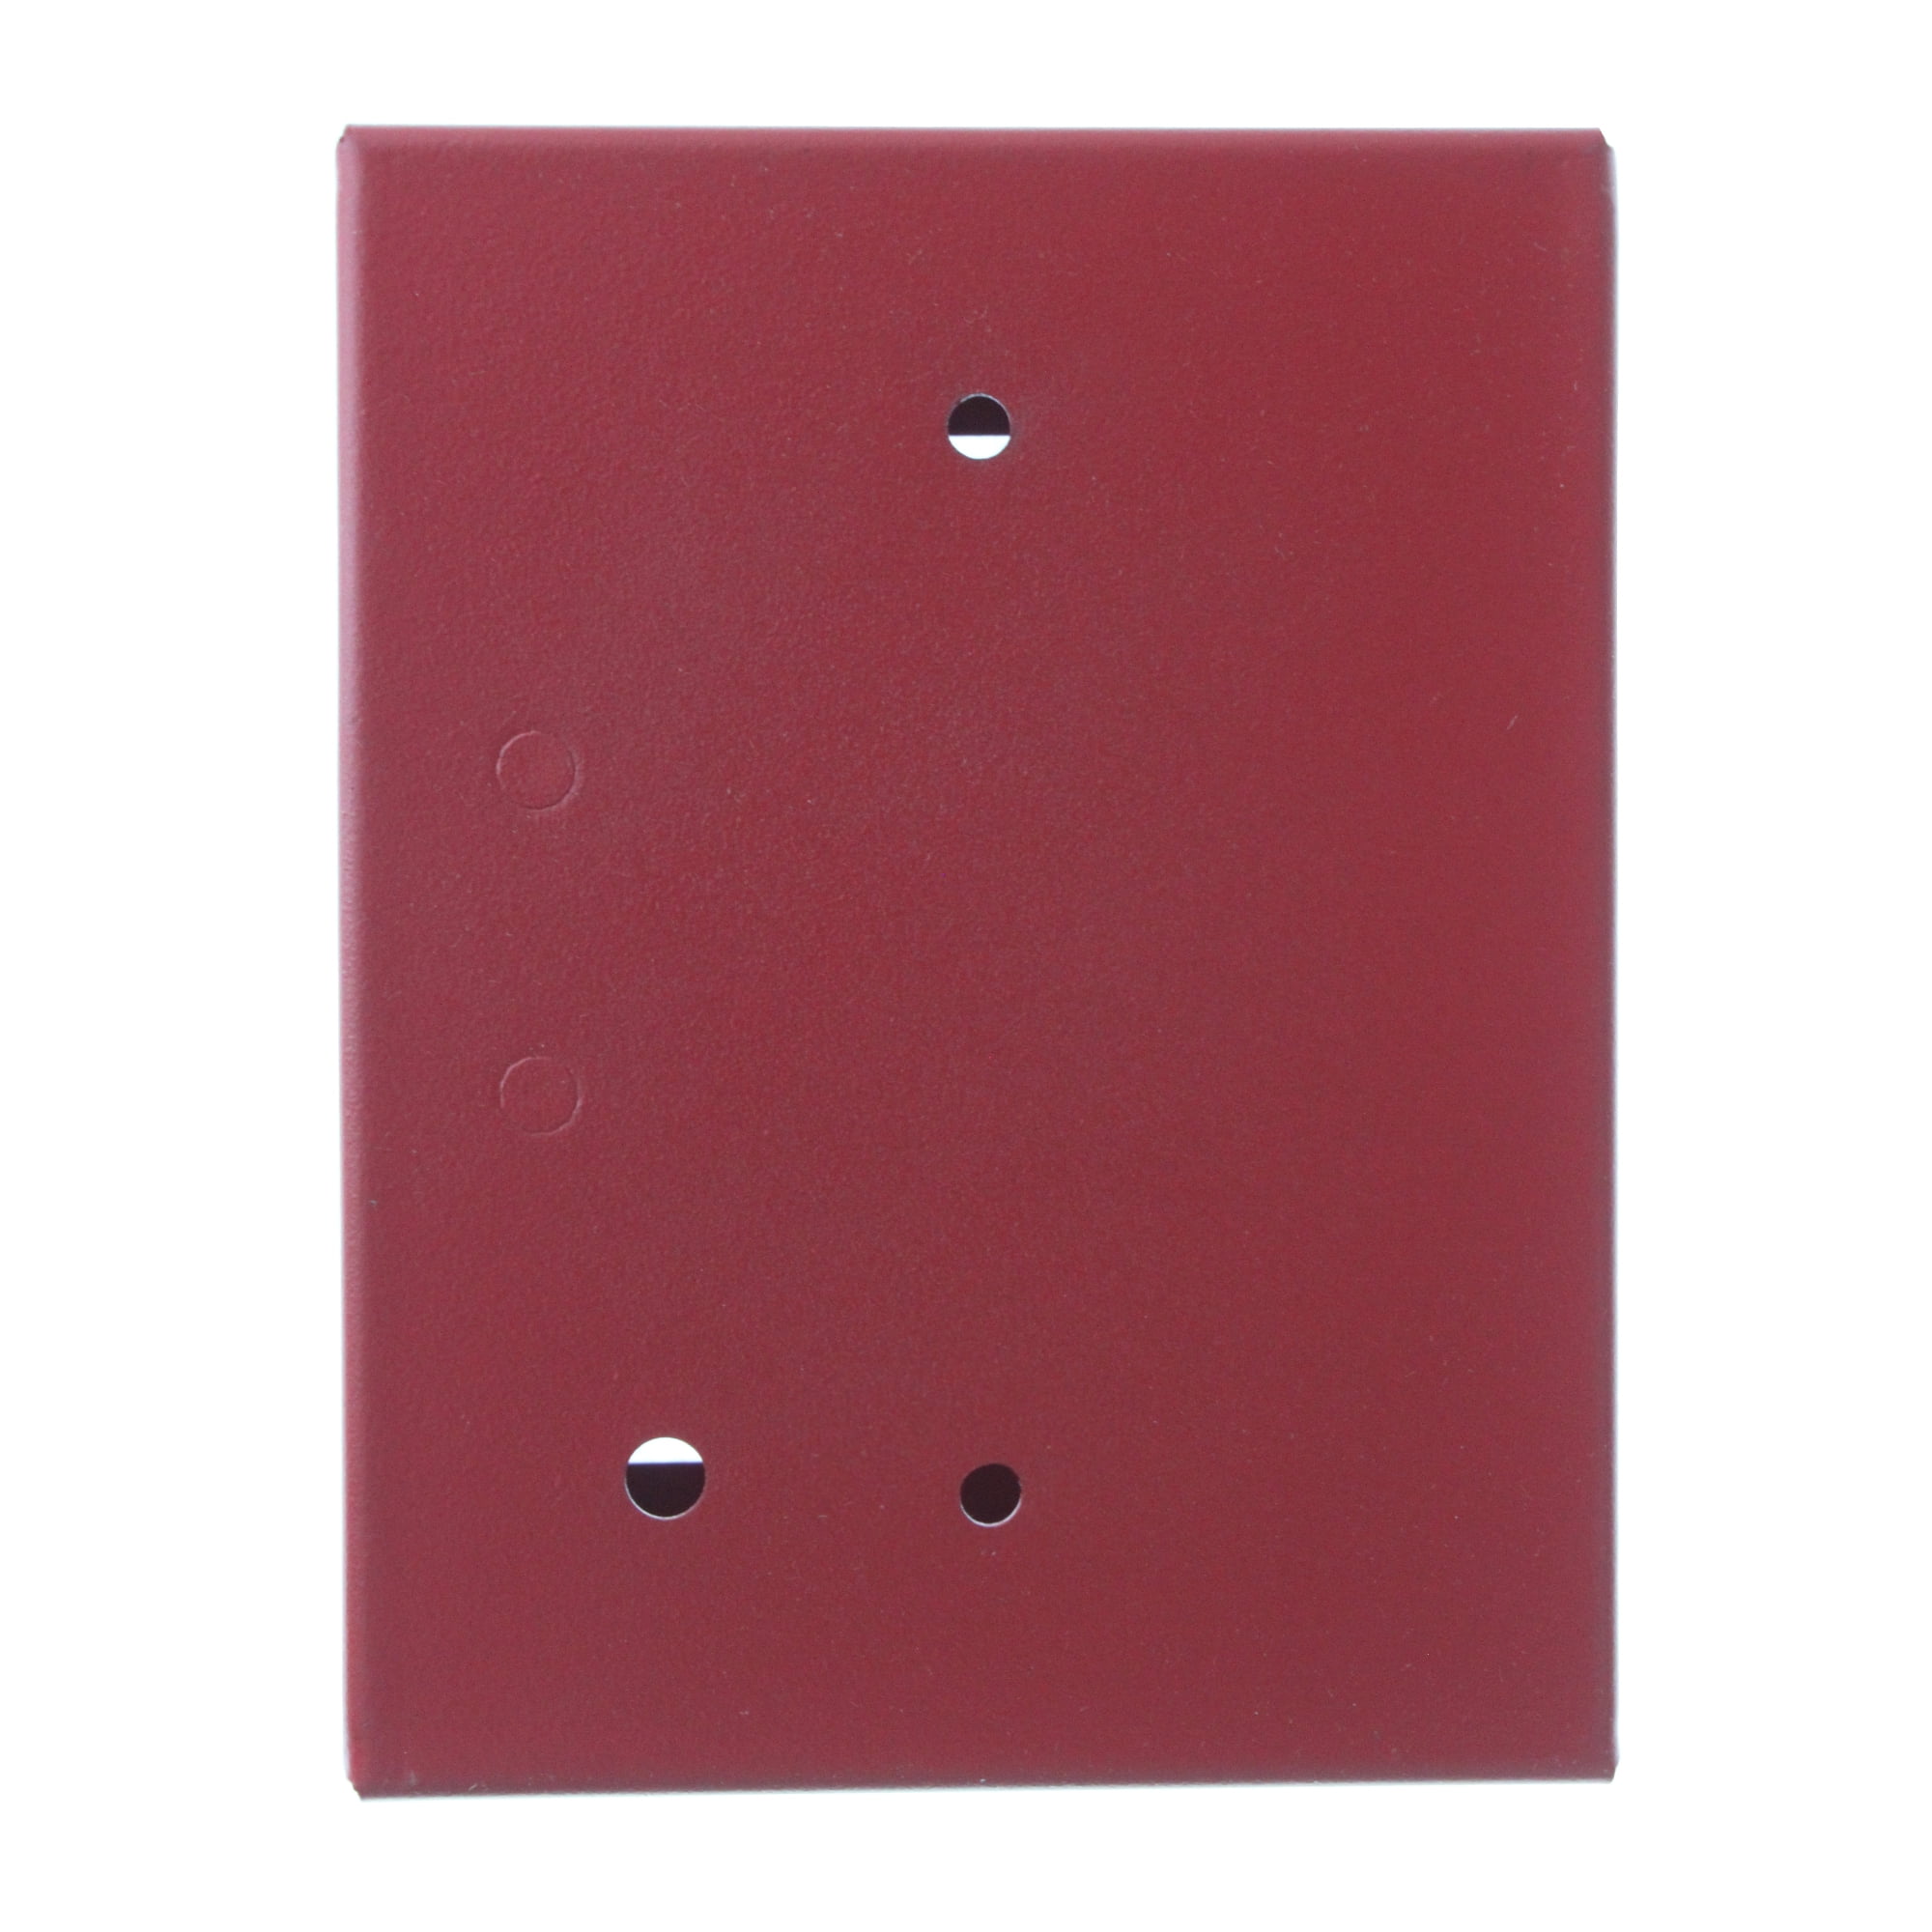 Simplex 2975-9178 fire alarm pull station mounting box SIngle Gang Red 